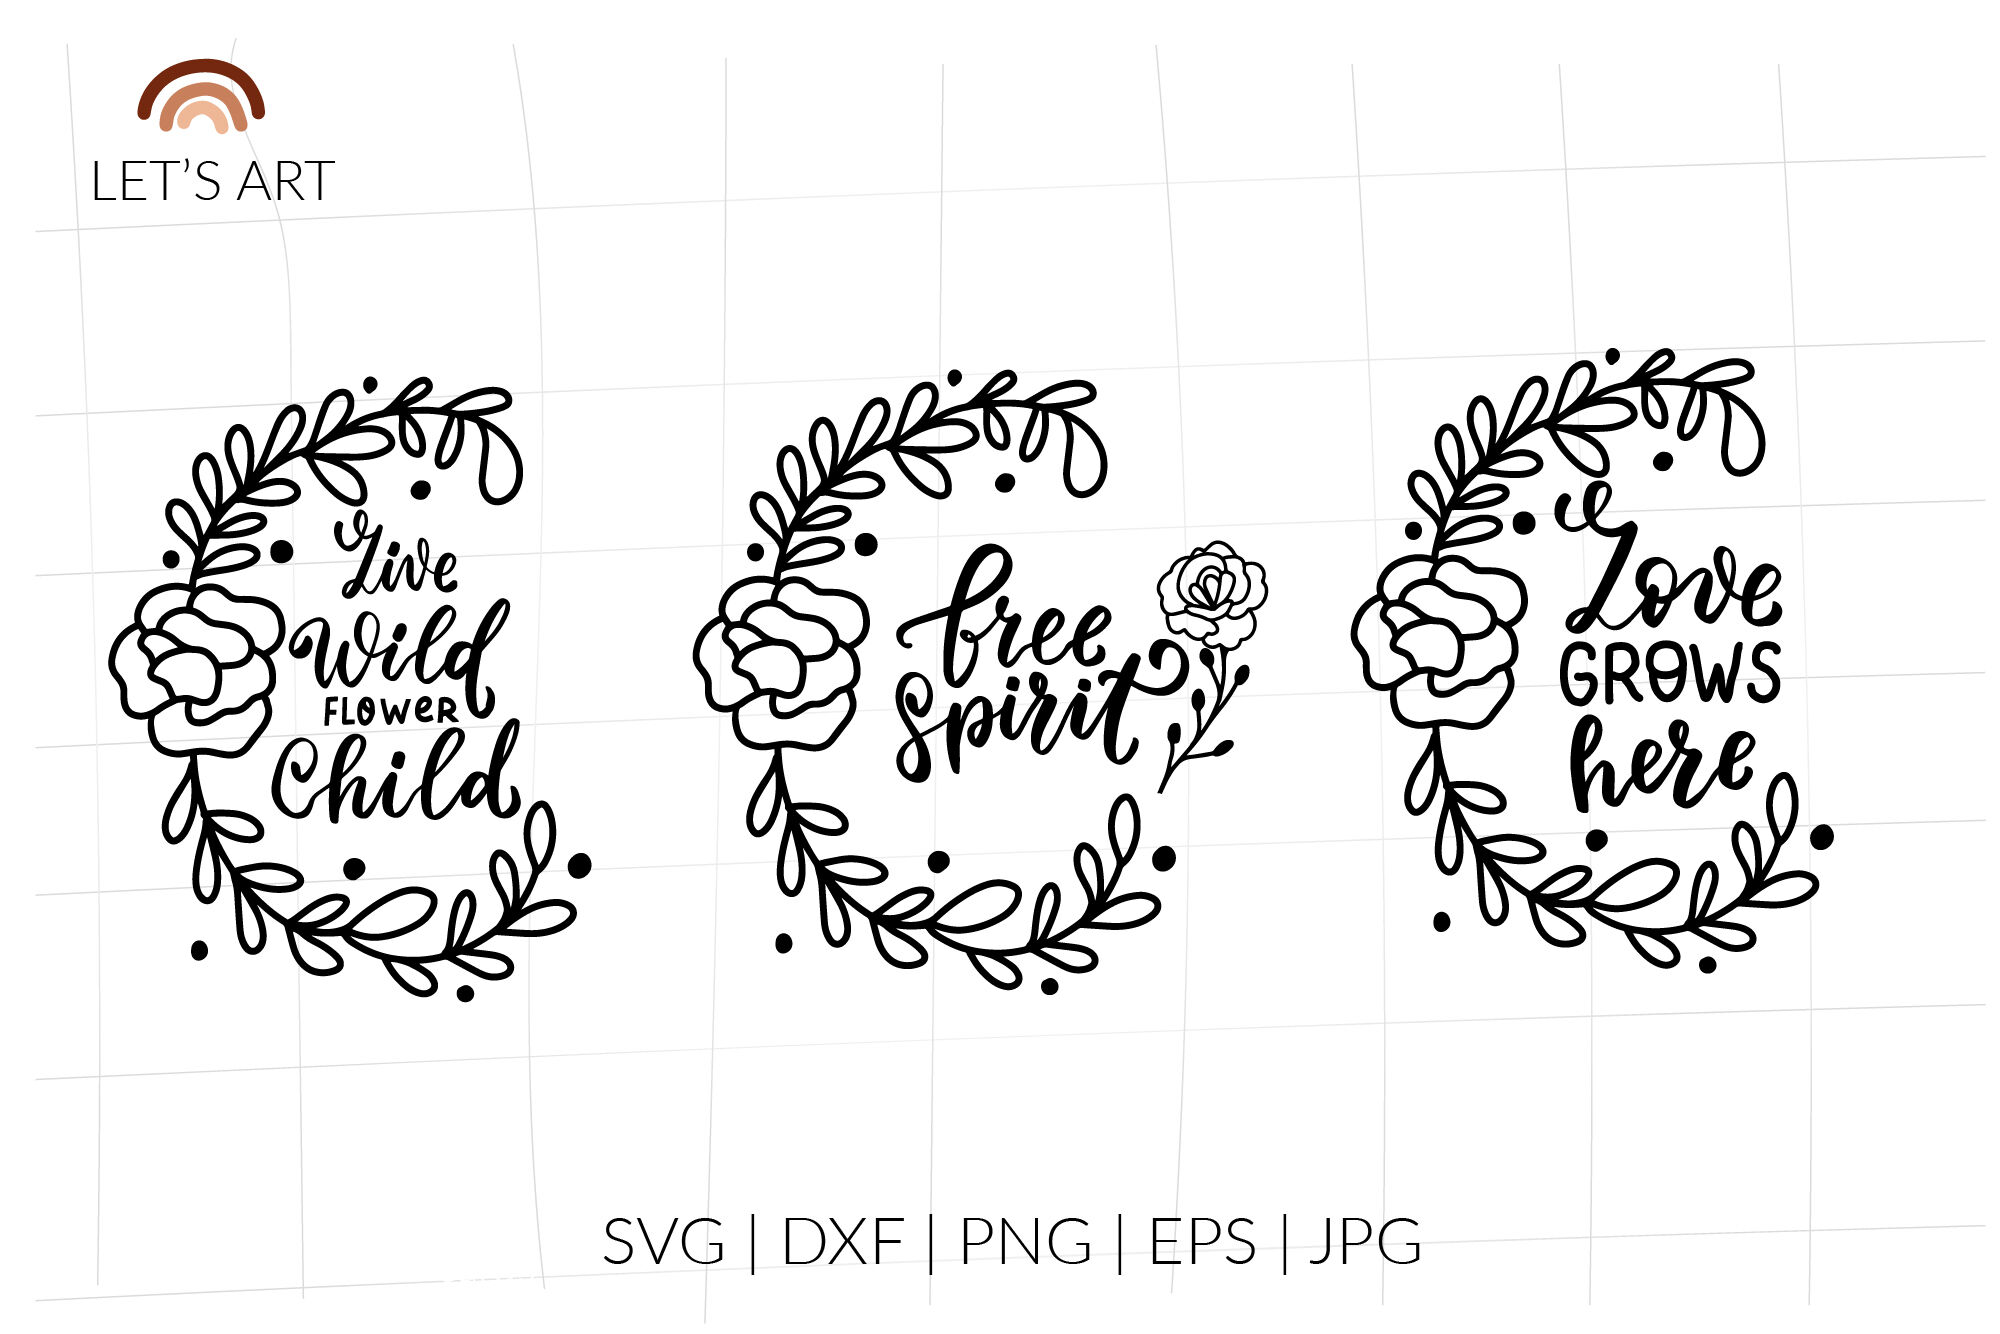 Download Love Grows Here Svg Wild Flowers Svg Shirt Free Spirit Svg Live Wil By Lettersclipart Thehungryjpeg Com